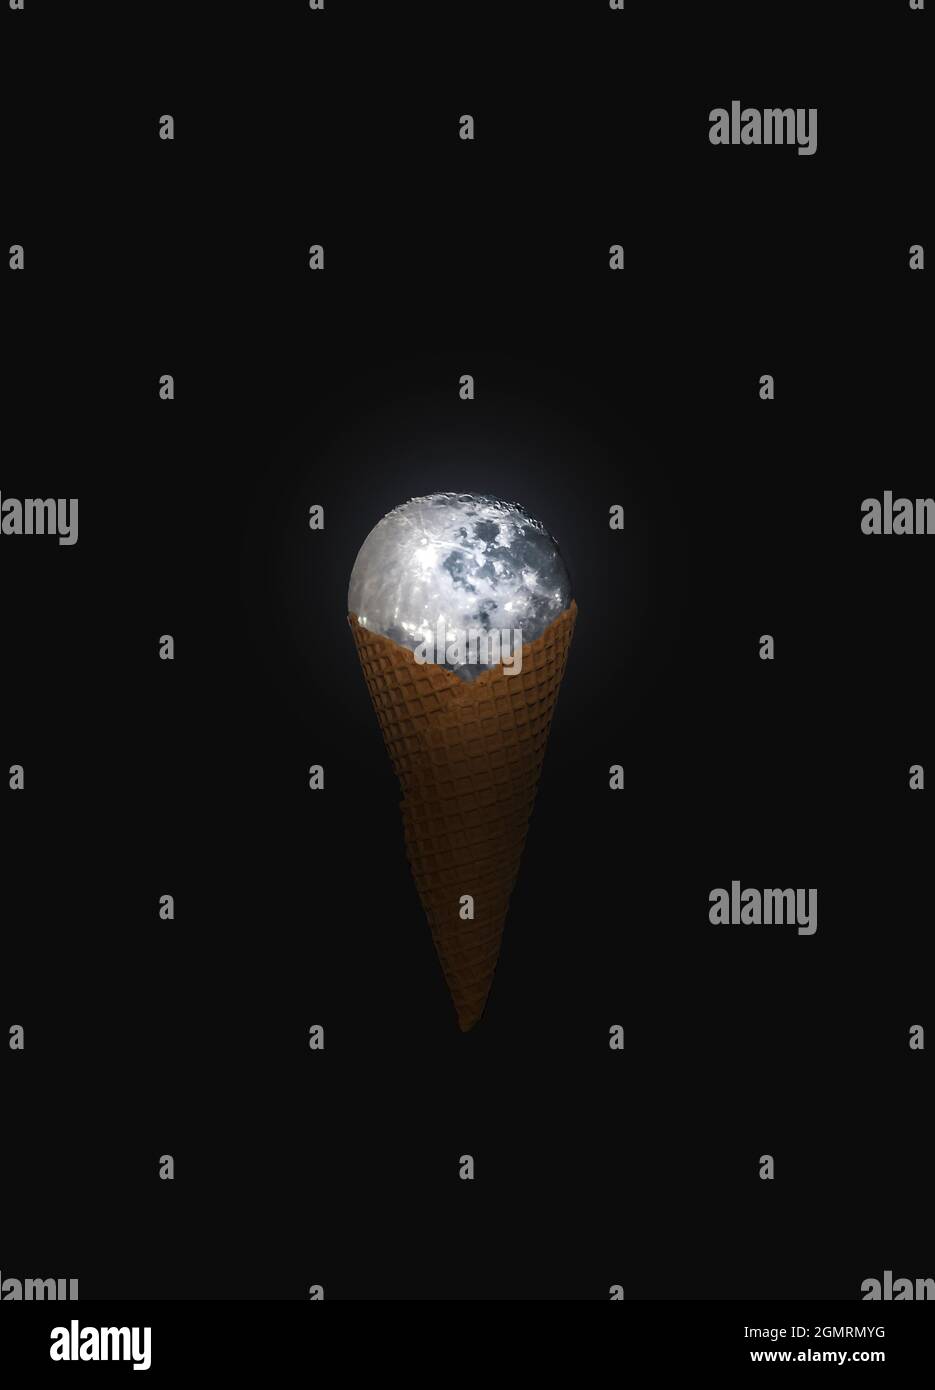 Full moon in a cone like frozen ice cream, glowing on dark night background. Minimal abstract food and environment concept. Copy space. Stock Photo